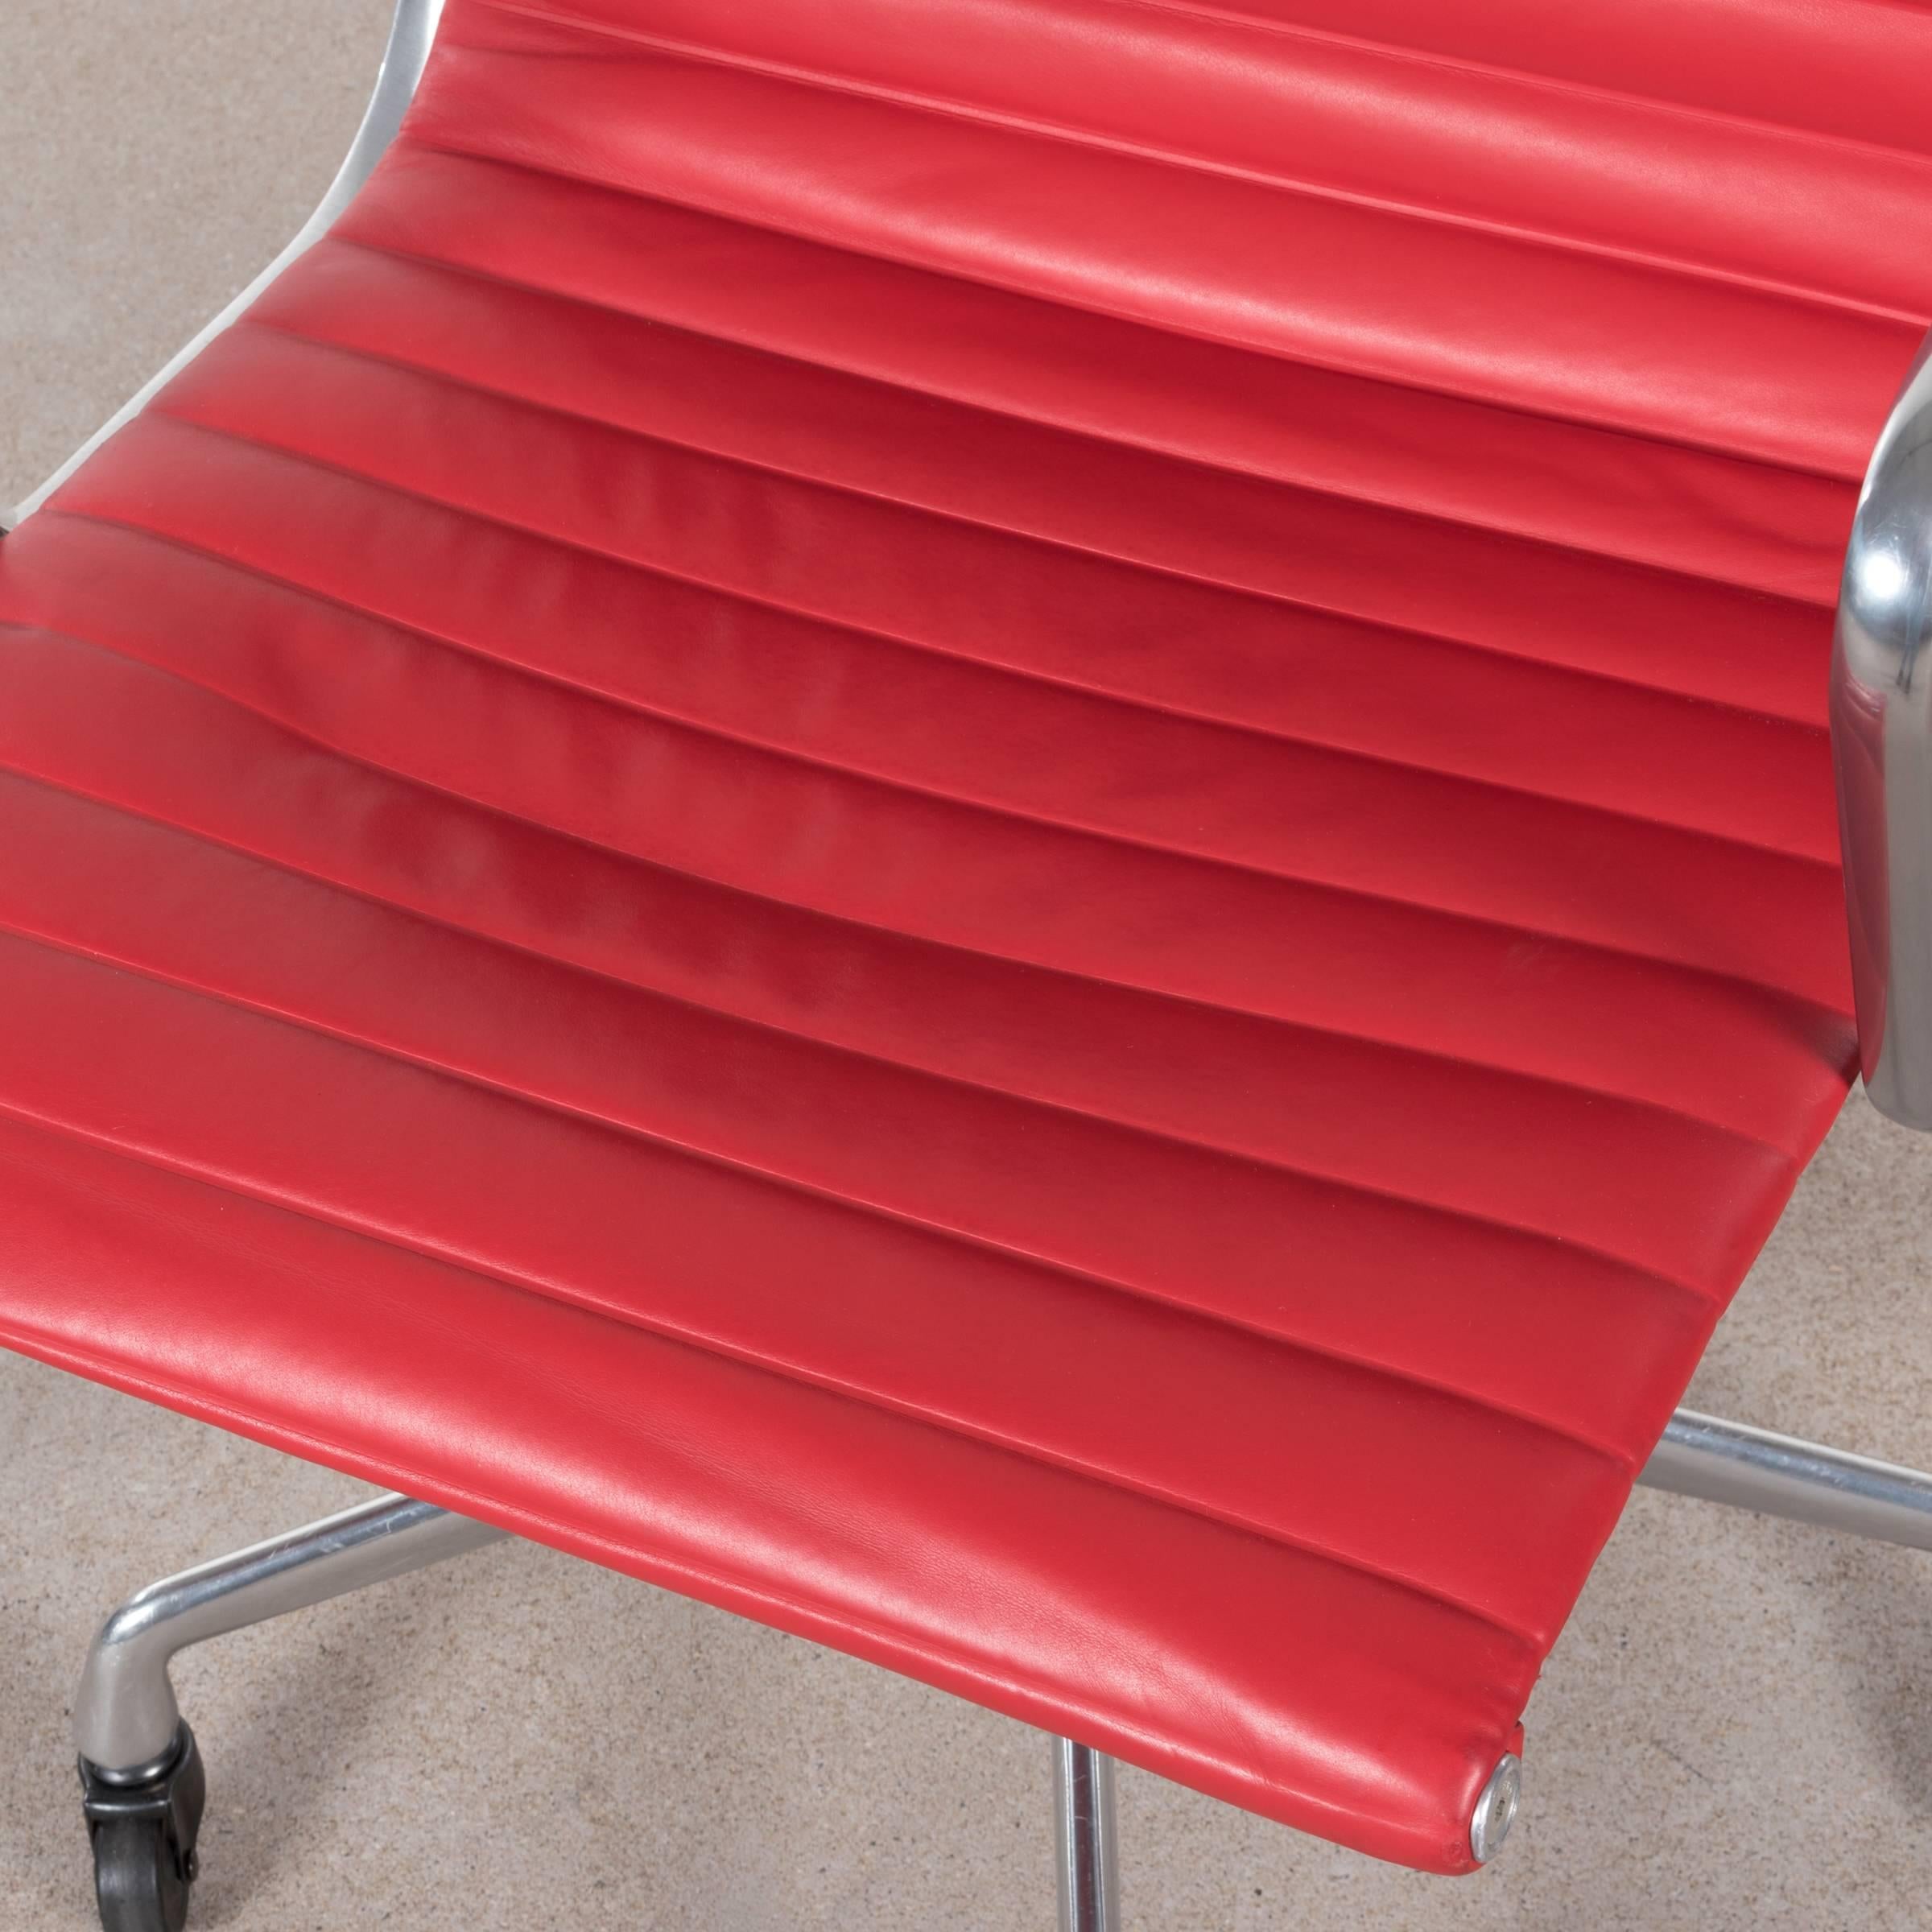 Mid-20th Century Eames Bright Red Leather Management Office Chair for Herman Miller